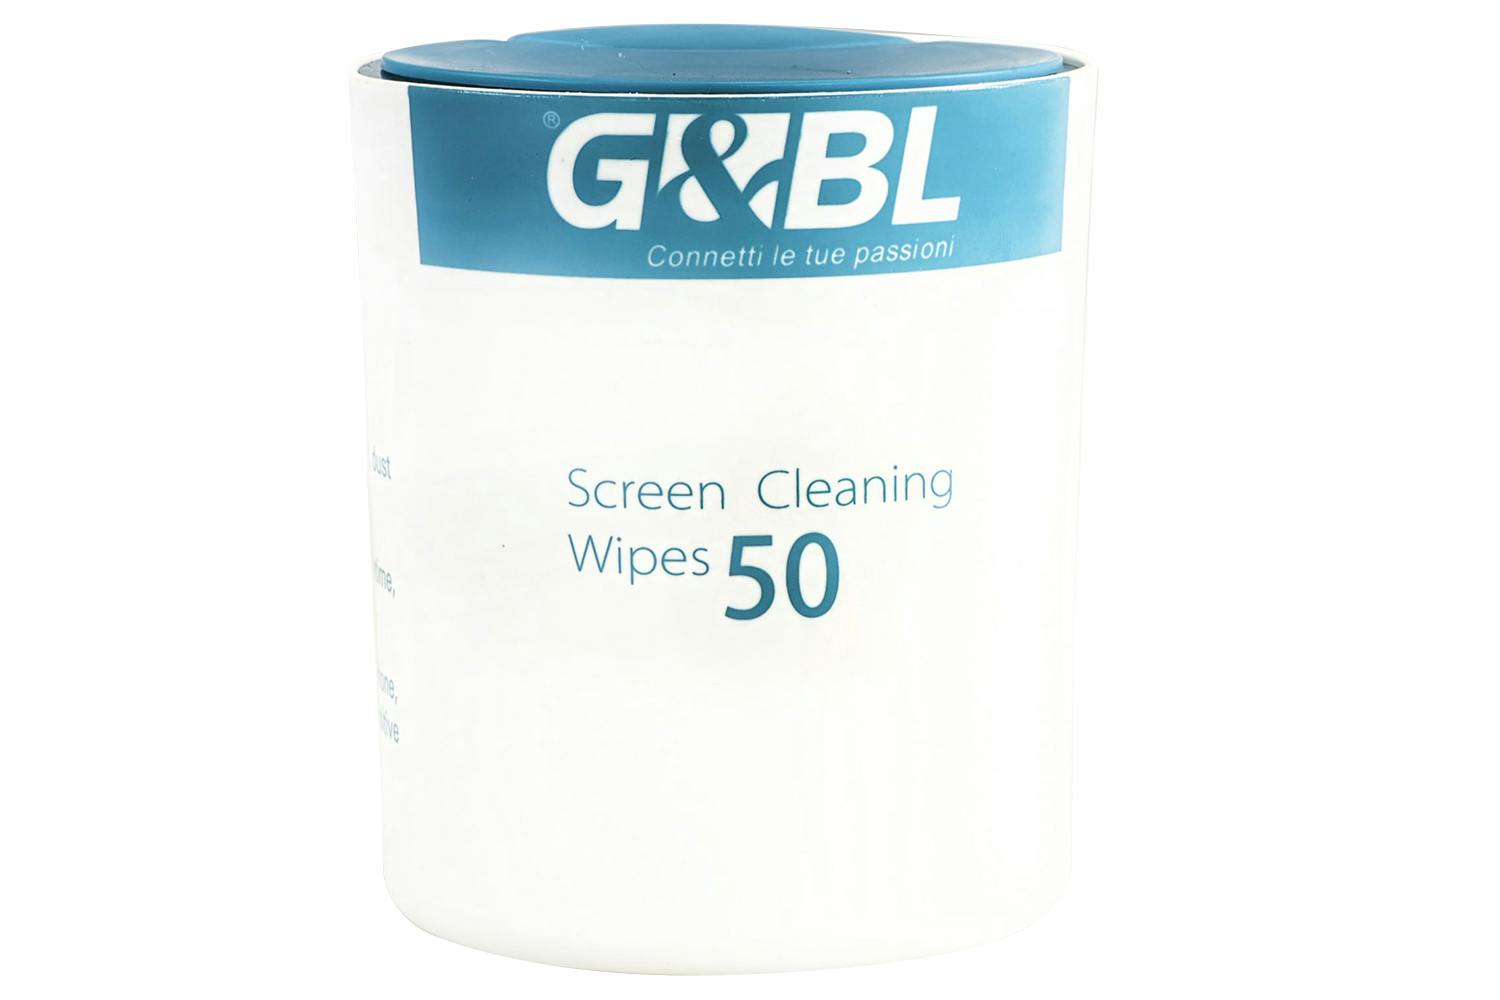 G&BL Screen Cleaning | 50 Wipes